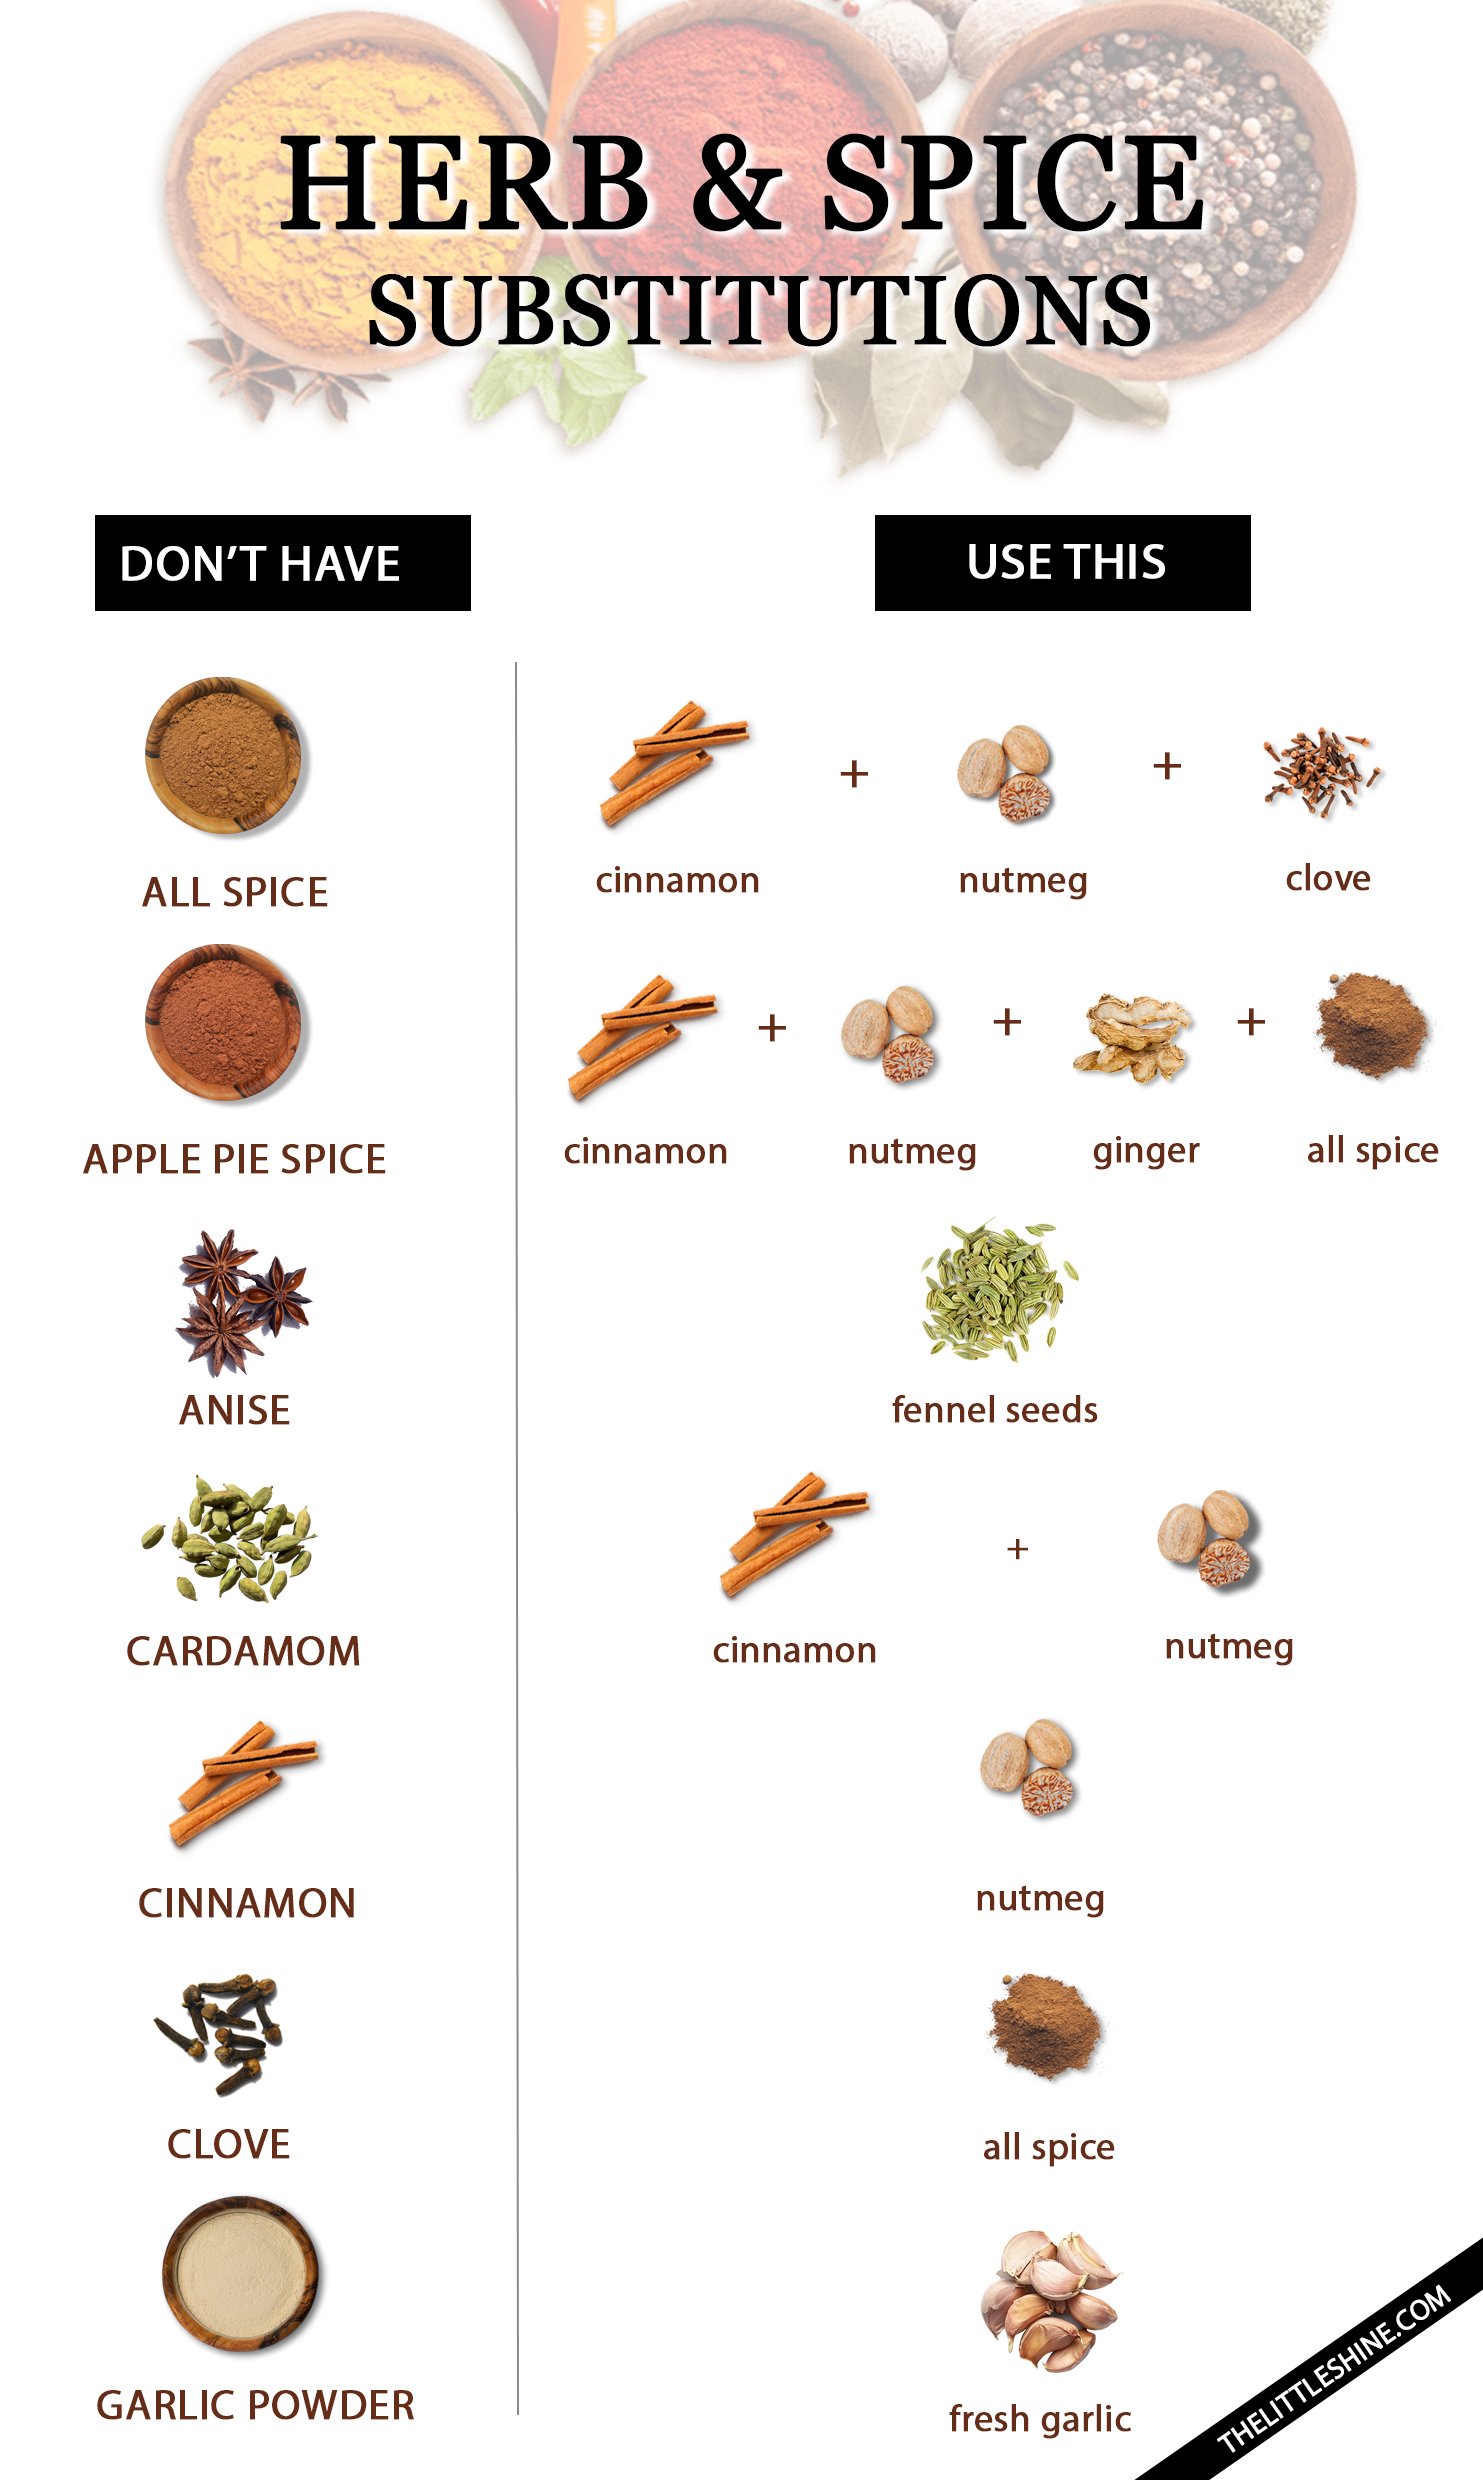 Herb and Spice Substitutions to use in your cooking or baking recipes